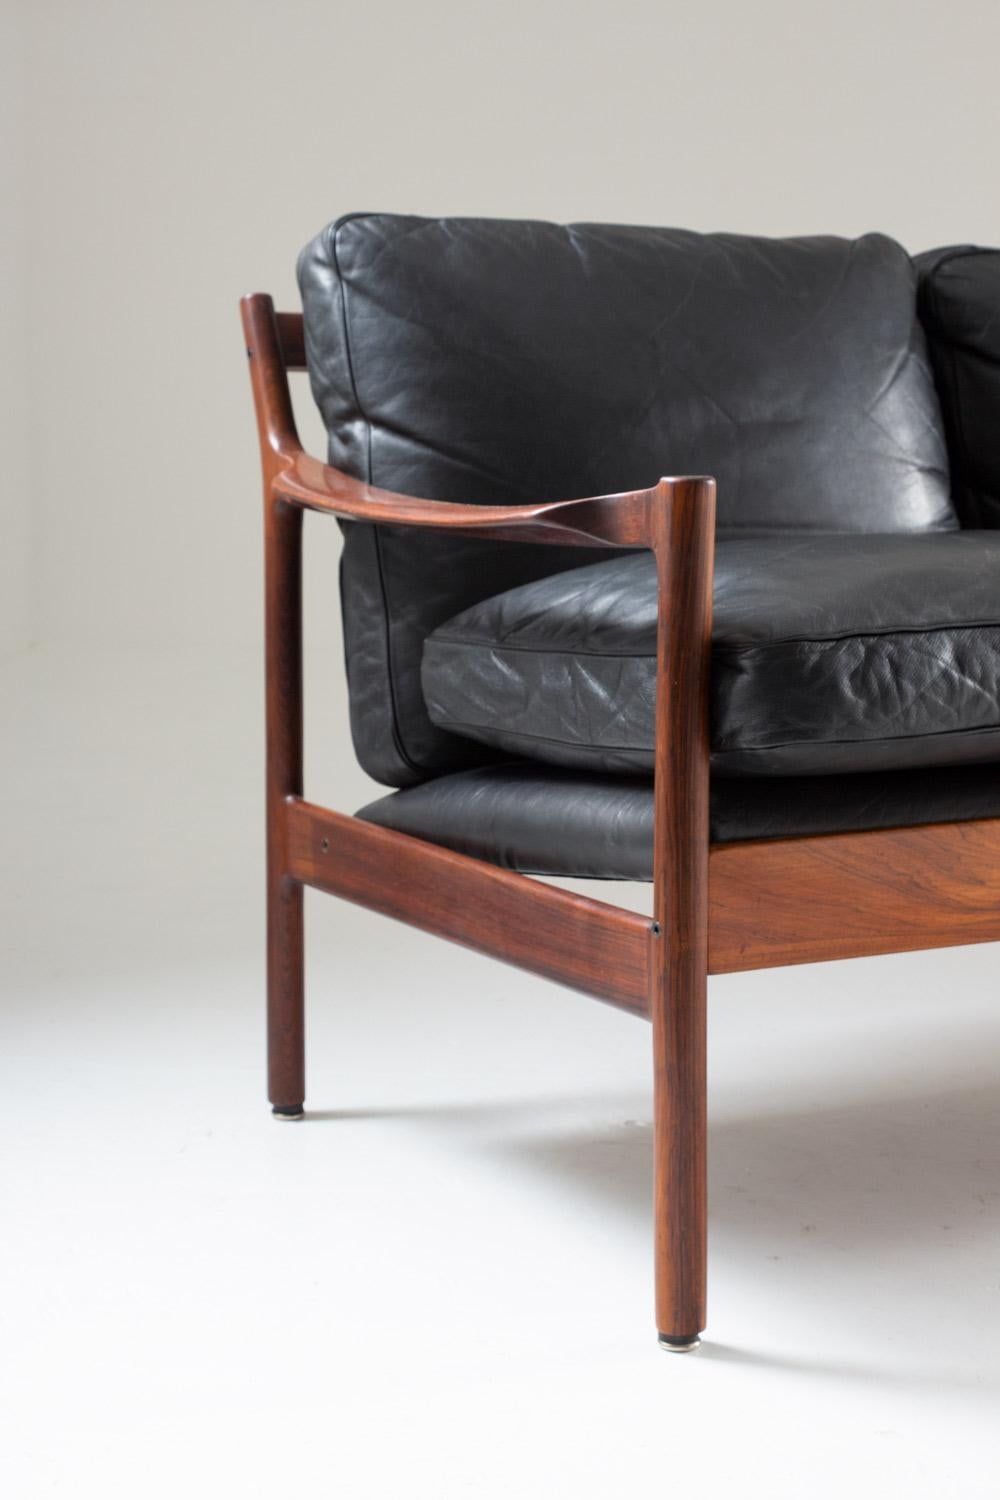 20th Century Midcentury Scandinavian Sofa in Leather and Rosewood by Torbjørn Afdal For Sale